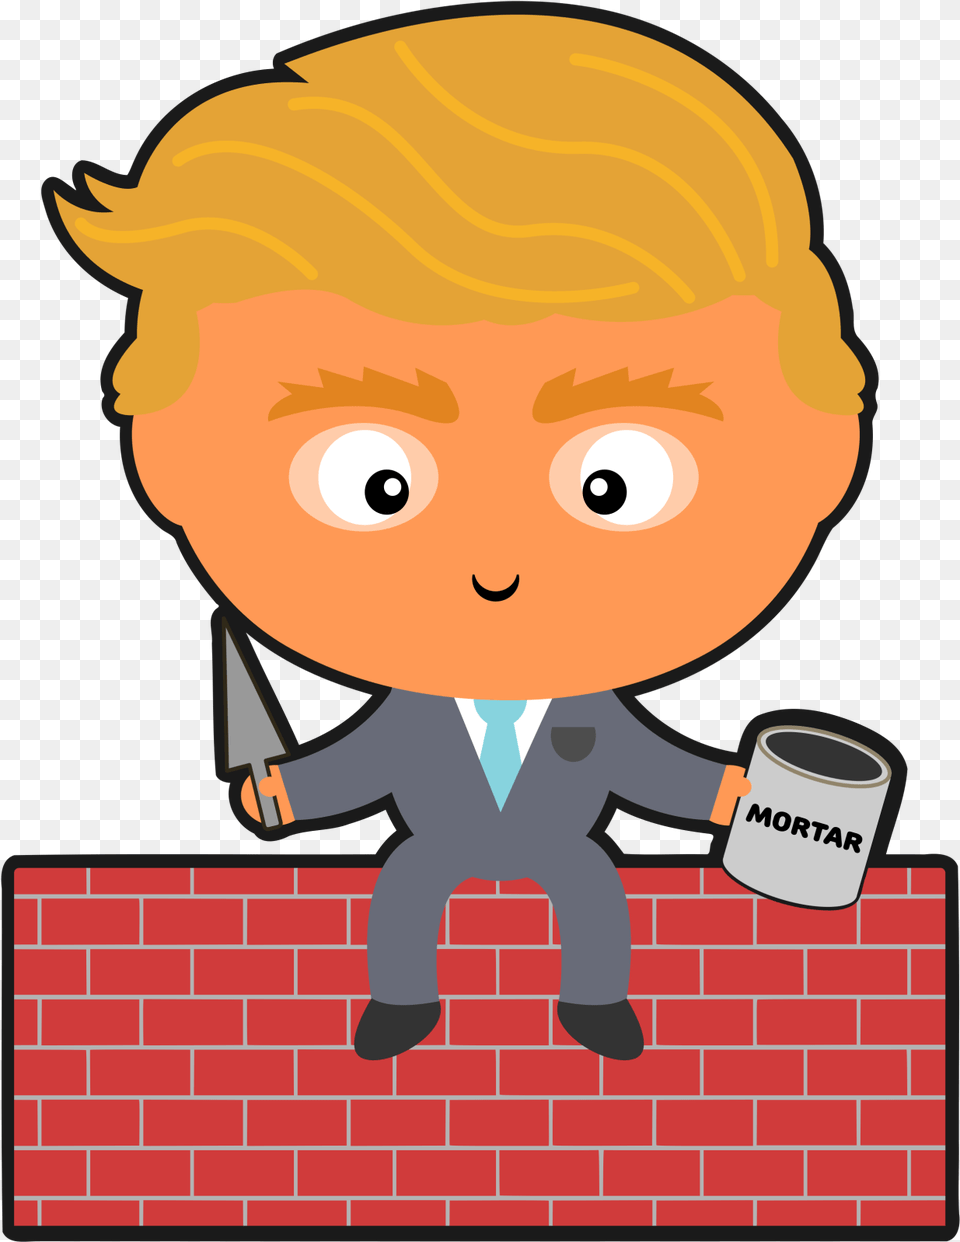 Republican Presidential Candidate Donald Trump Sitting Metselverbanden, Architecture, Wall, Building, Brick Png Image